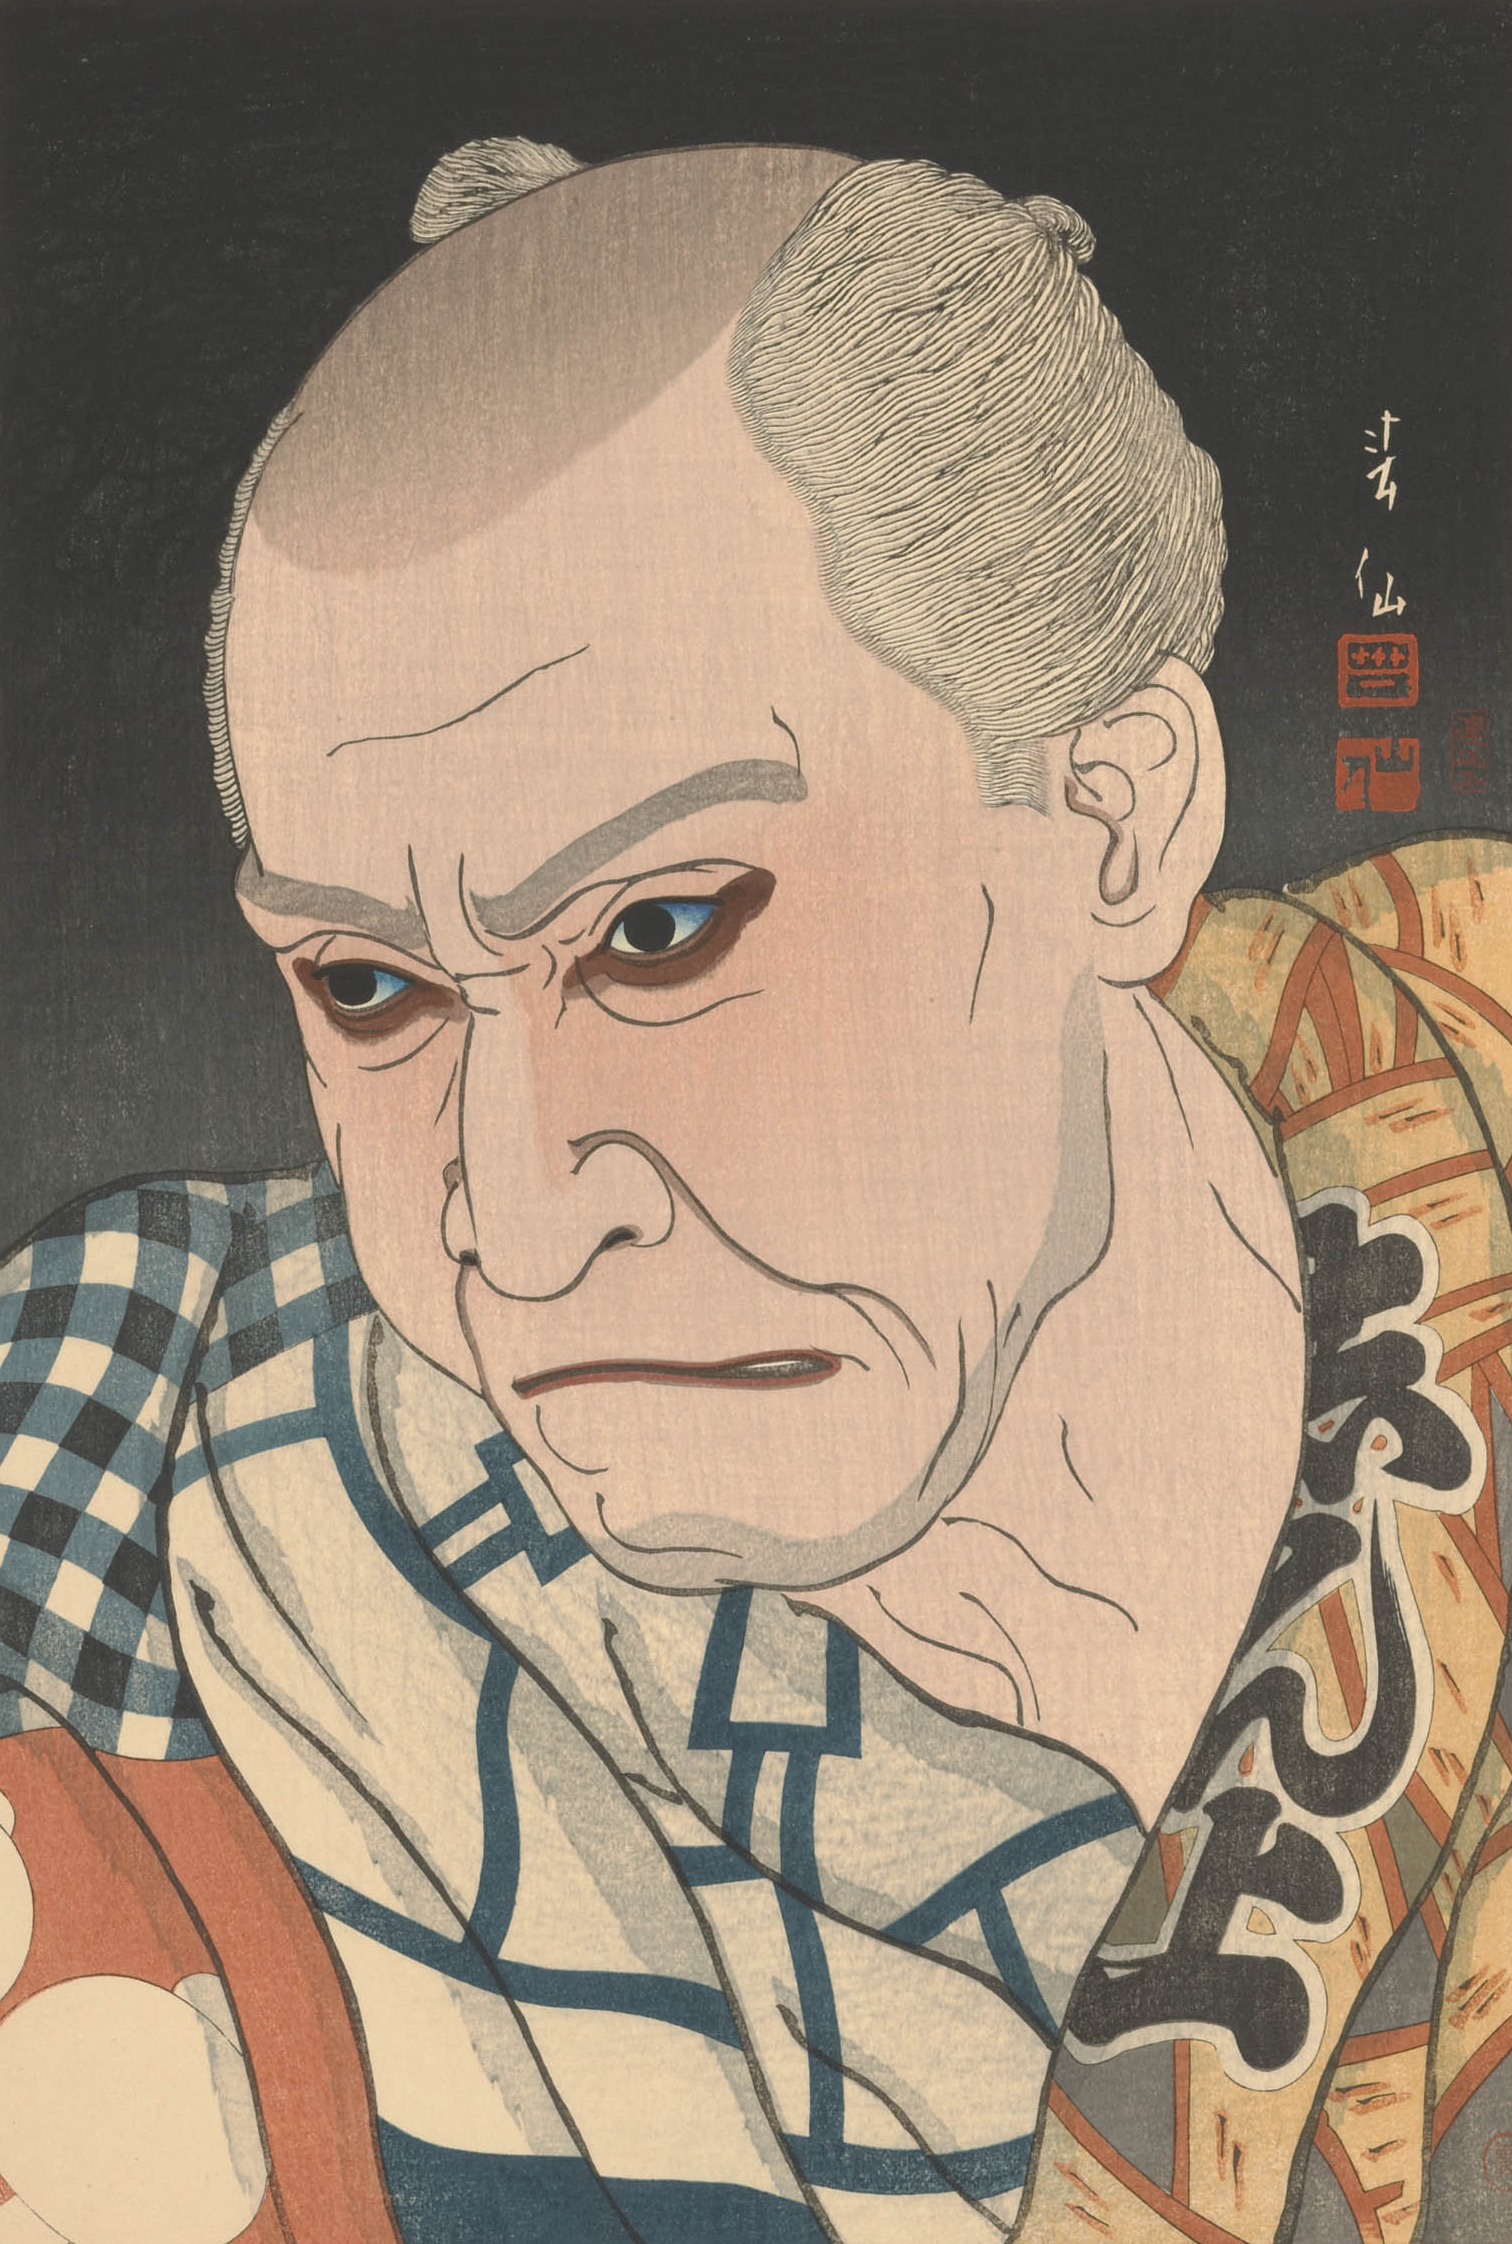 an old man's face rendered artistically